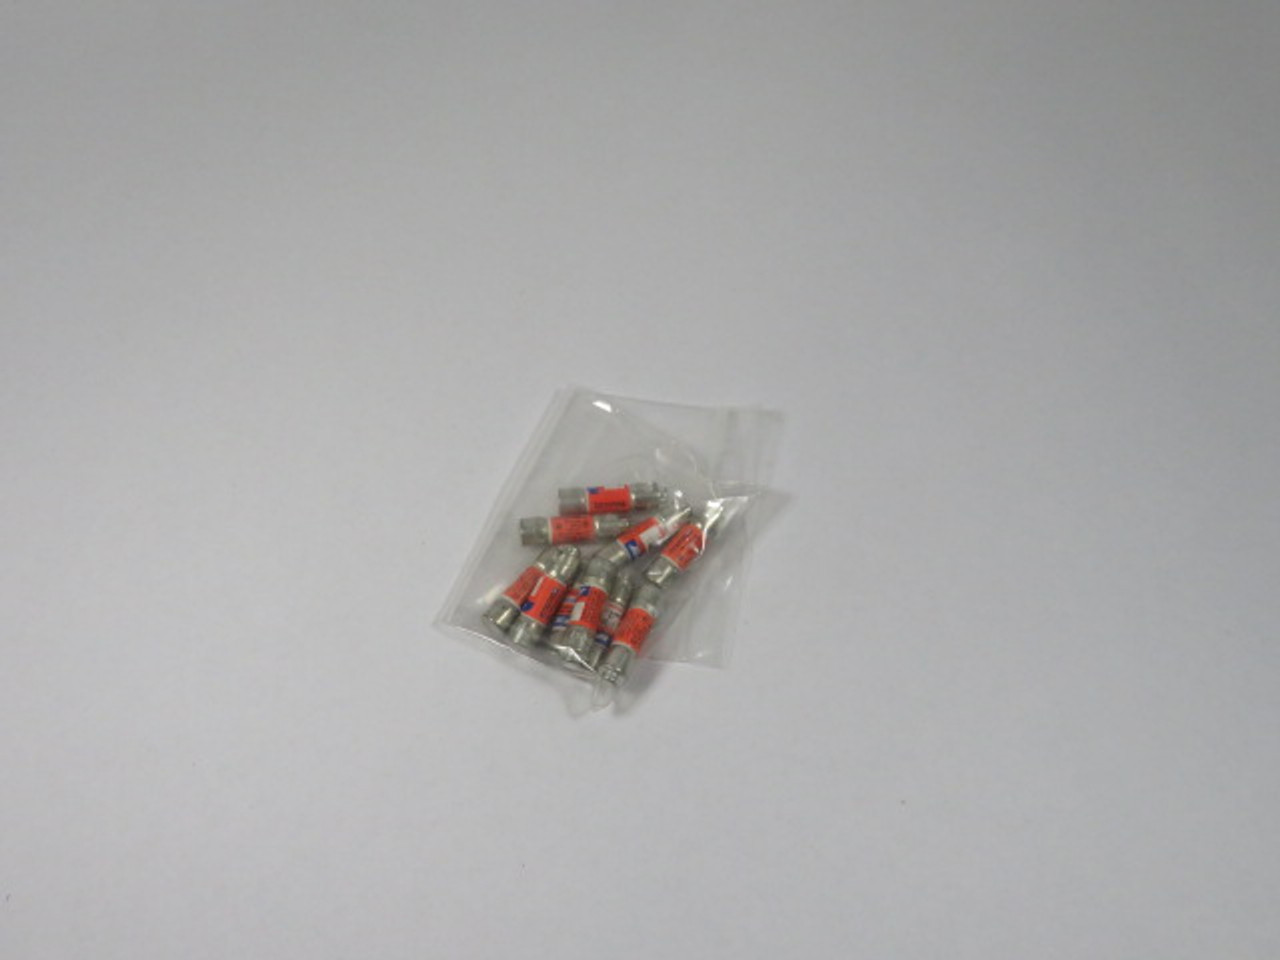 Amp-Trap ATDR1 Time Delay Fuse 1A 600V Lot of 10 USED